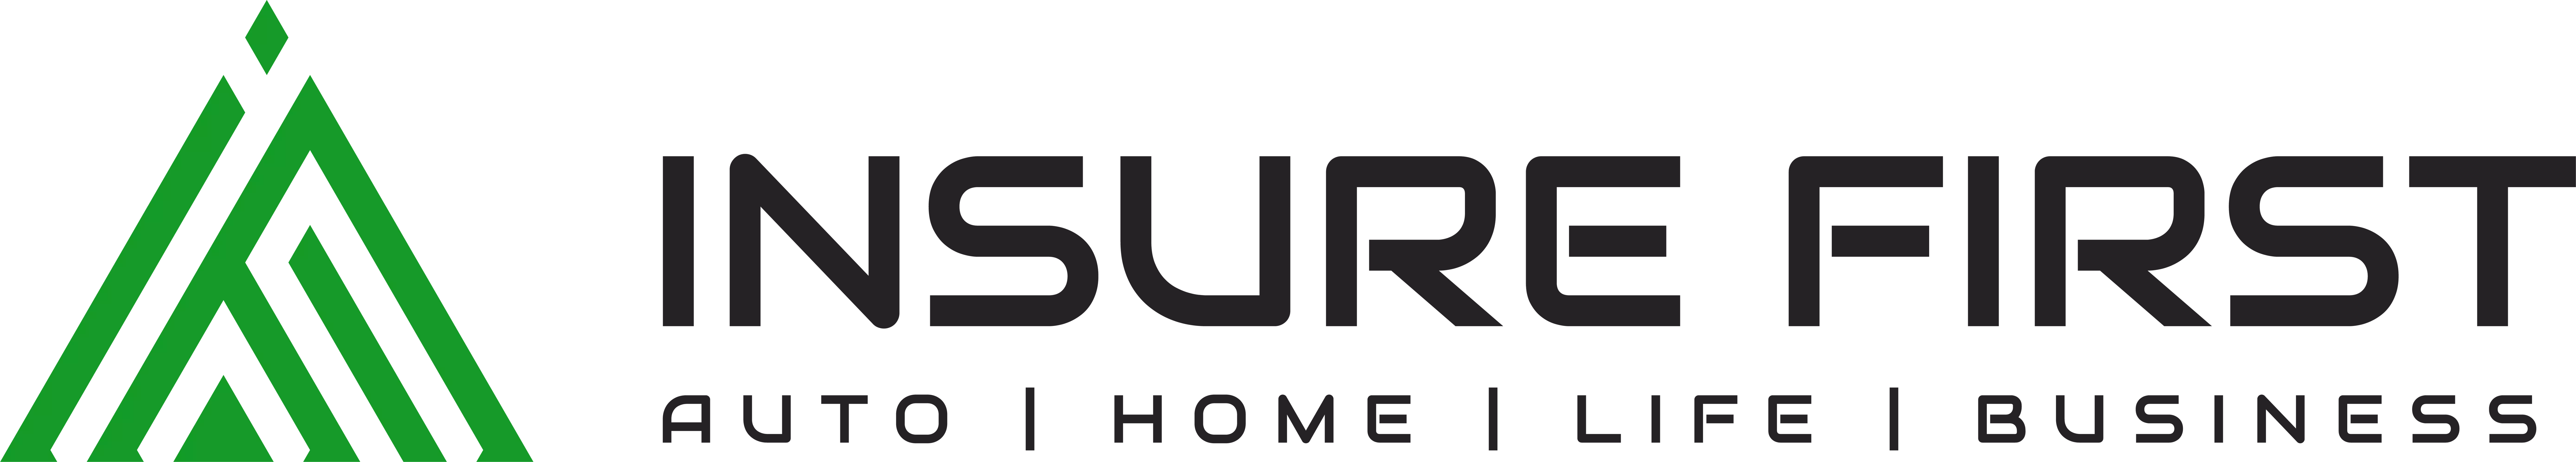 INSURE FIRST HOME AND AUTO INSURANCE LOGO